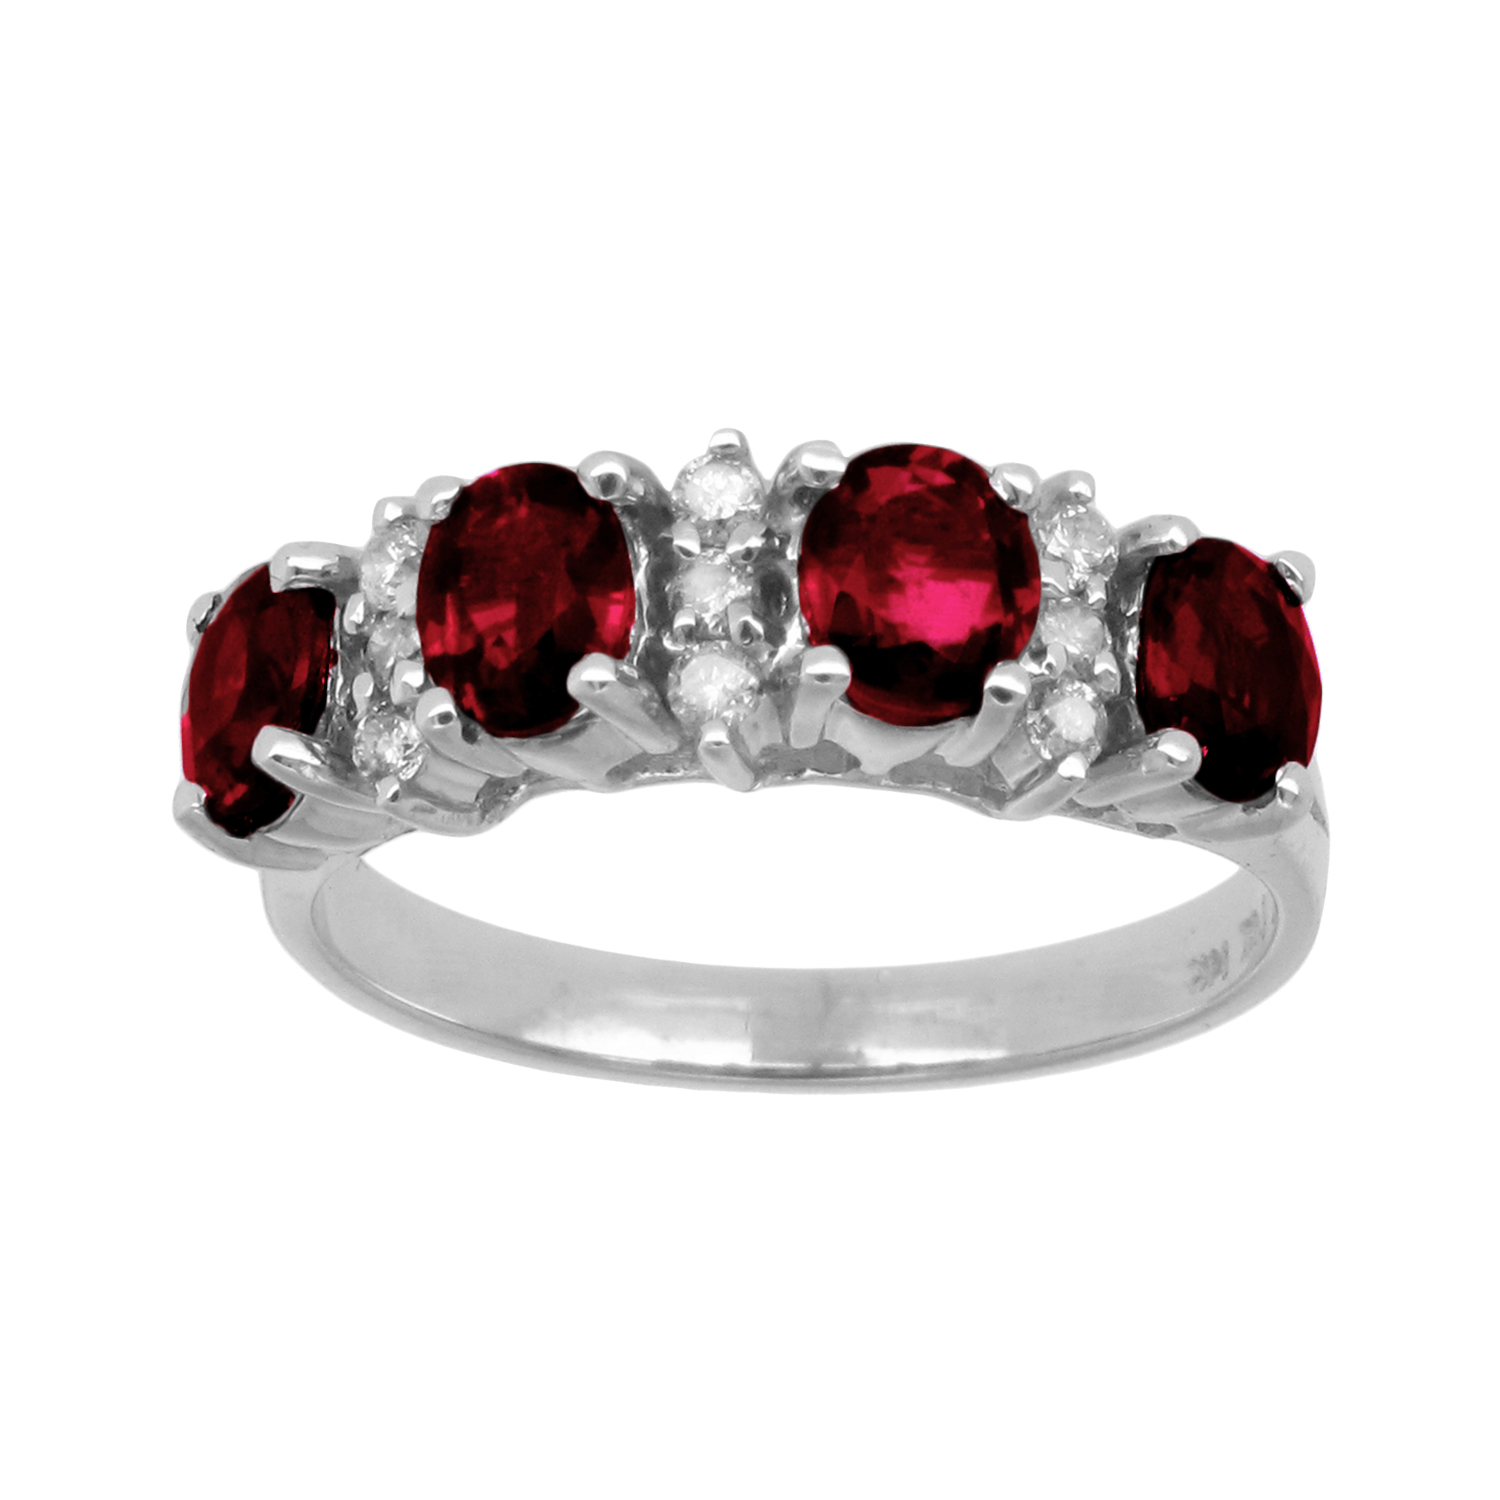 1.69cttw Natural Heated Ruby and Diamond Fashion Band set in 14k Gold 